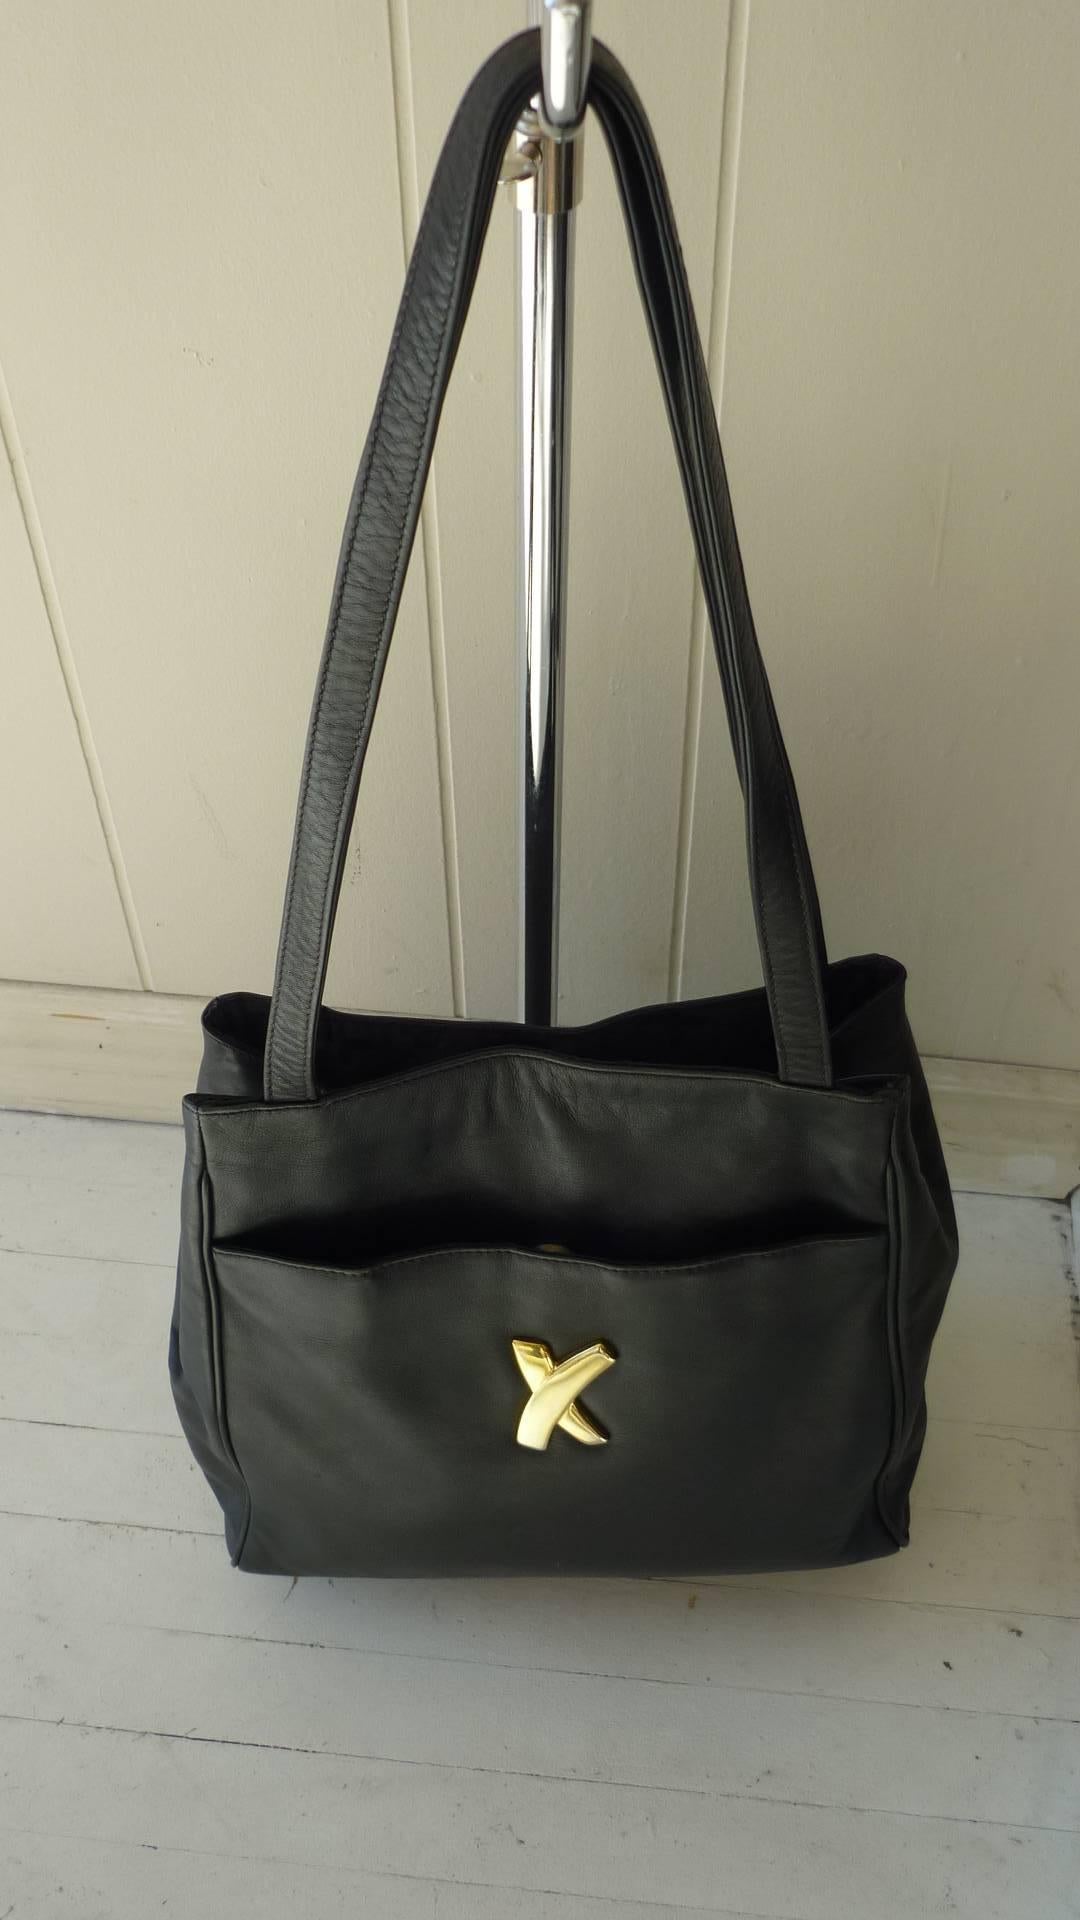 Nice size bag with a double strap drop of 12.5